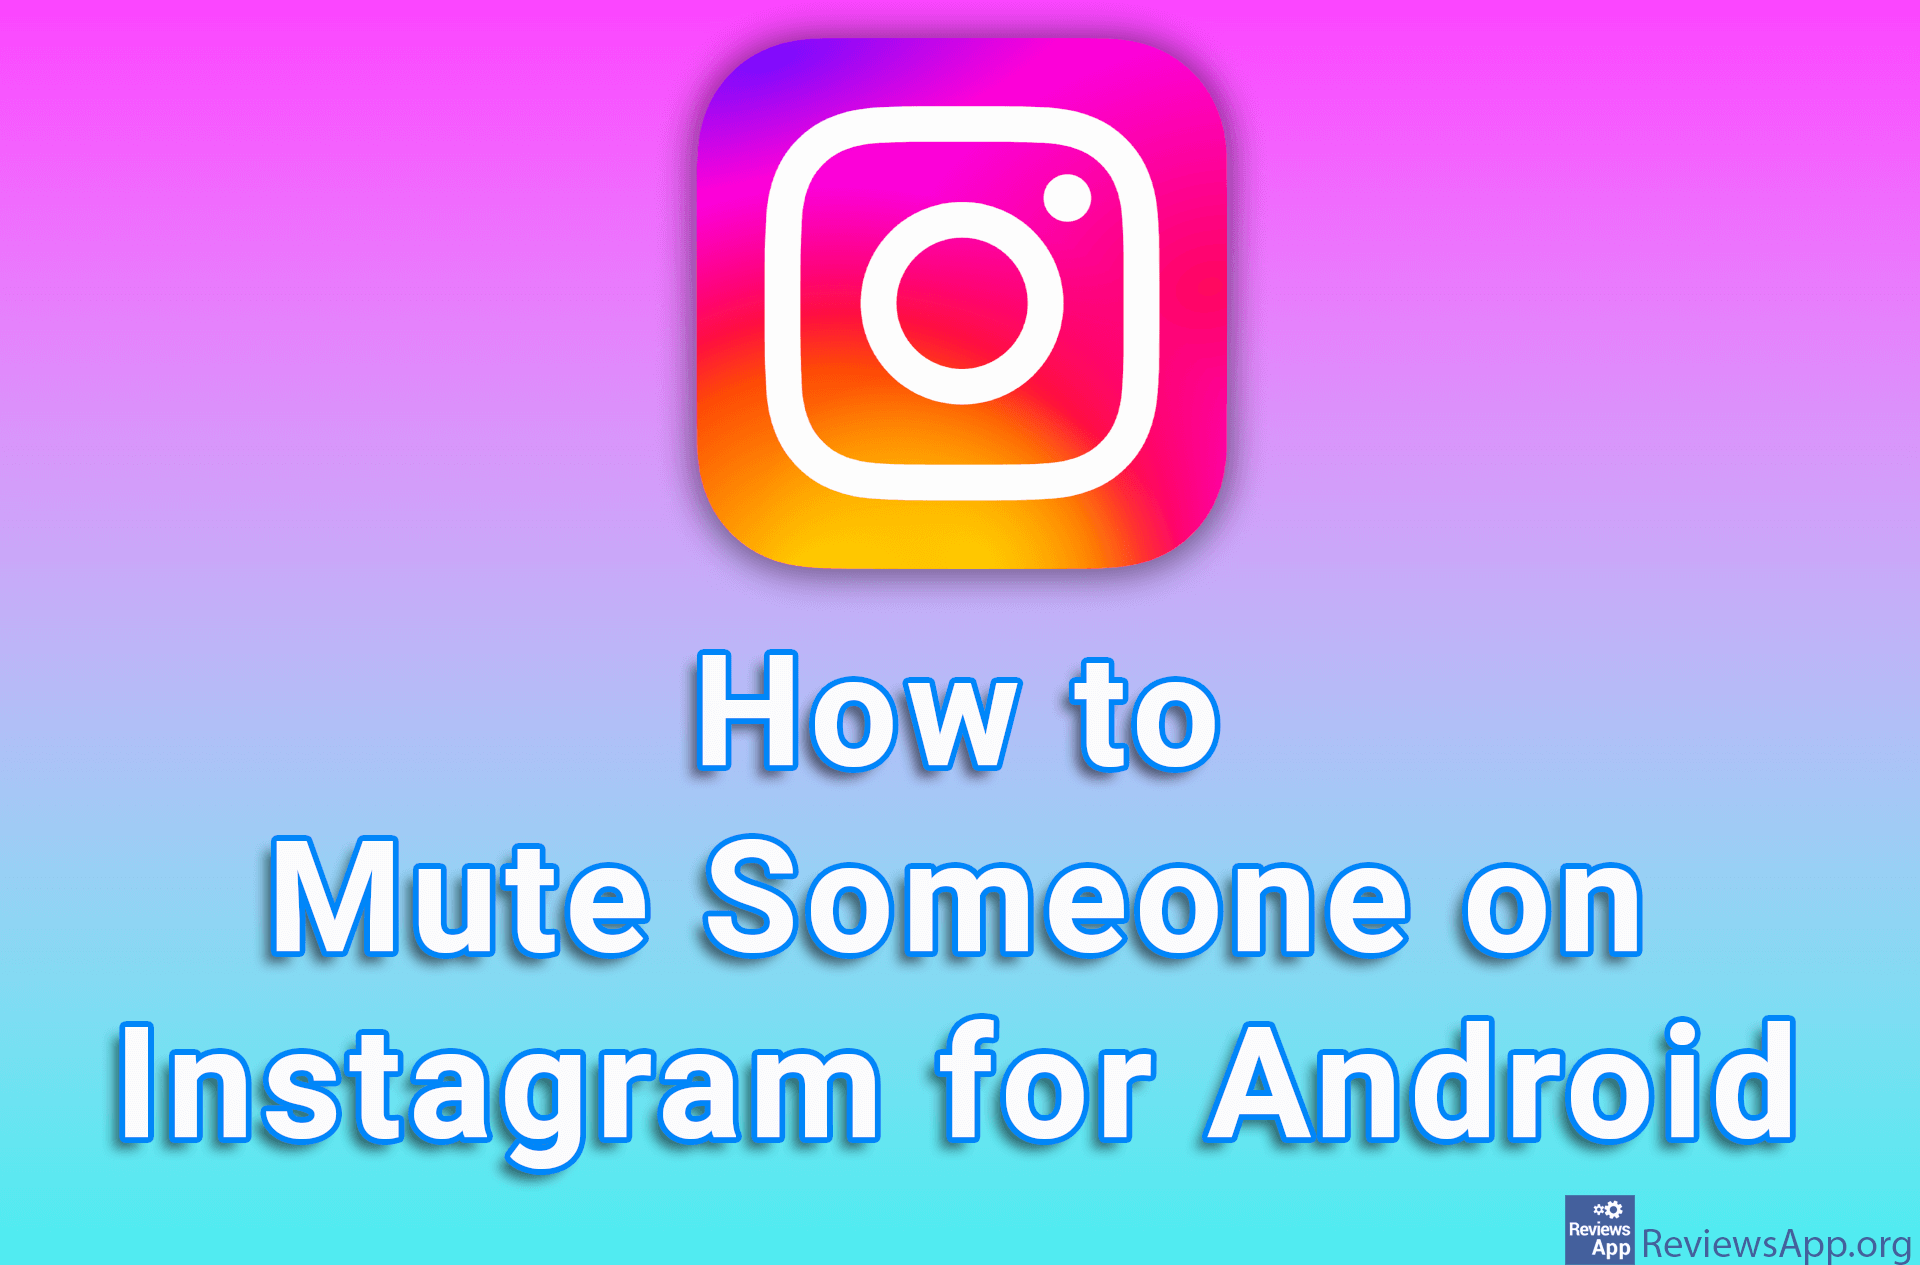 How to Mute Someone on Instagram for Android